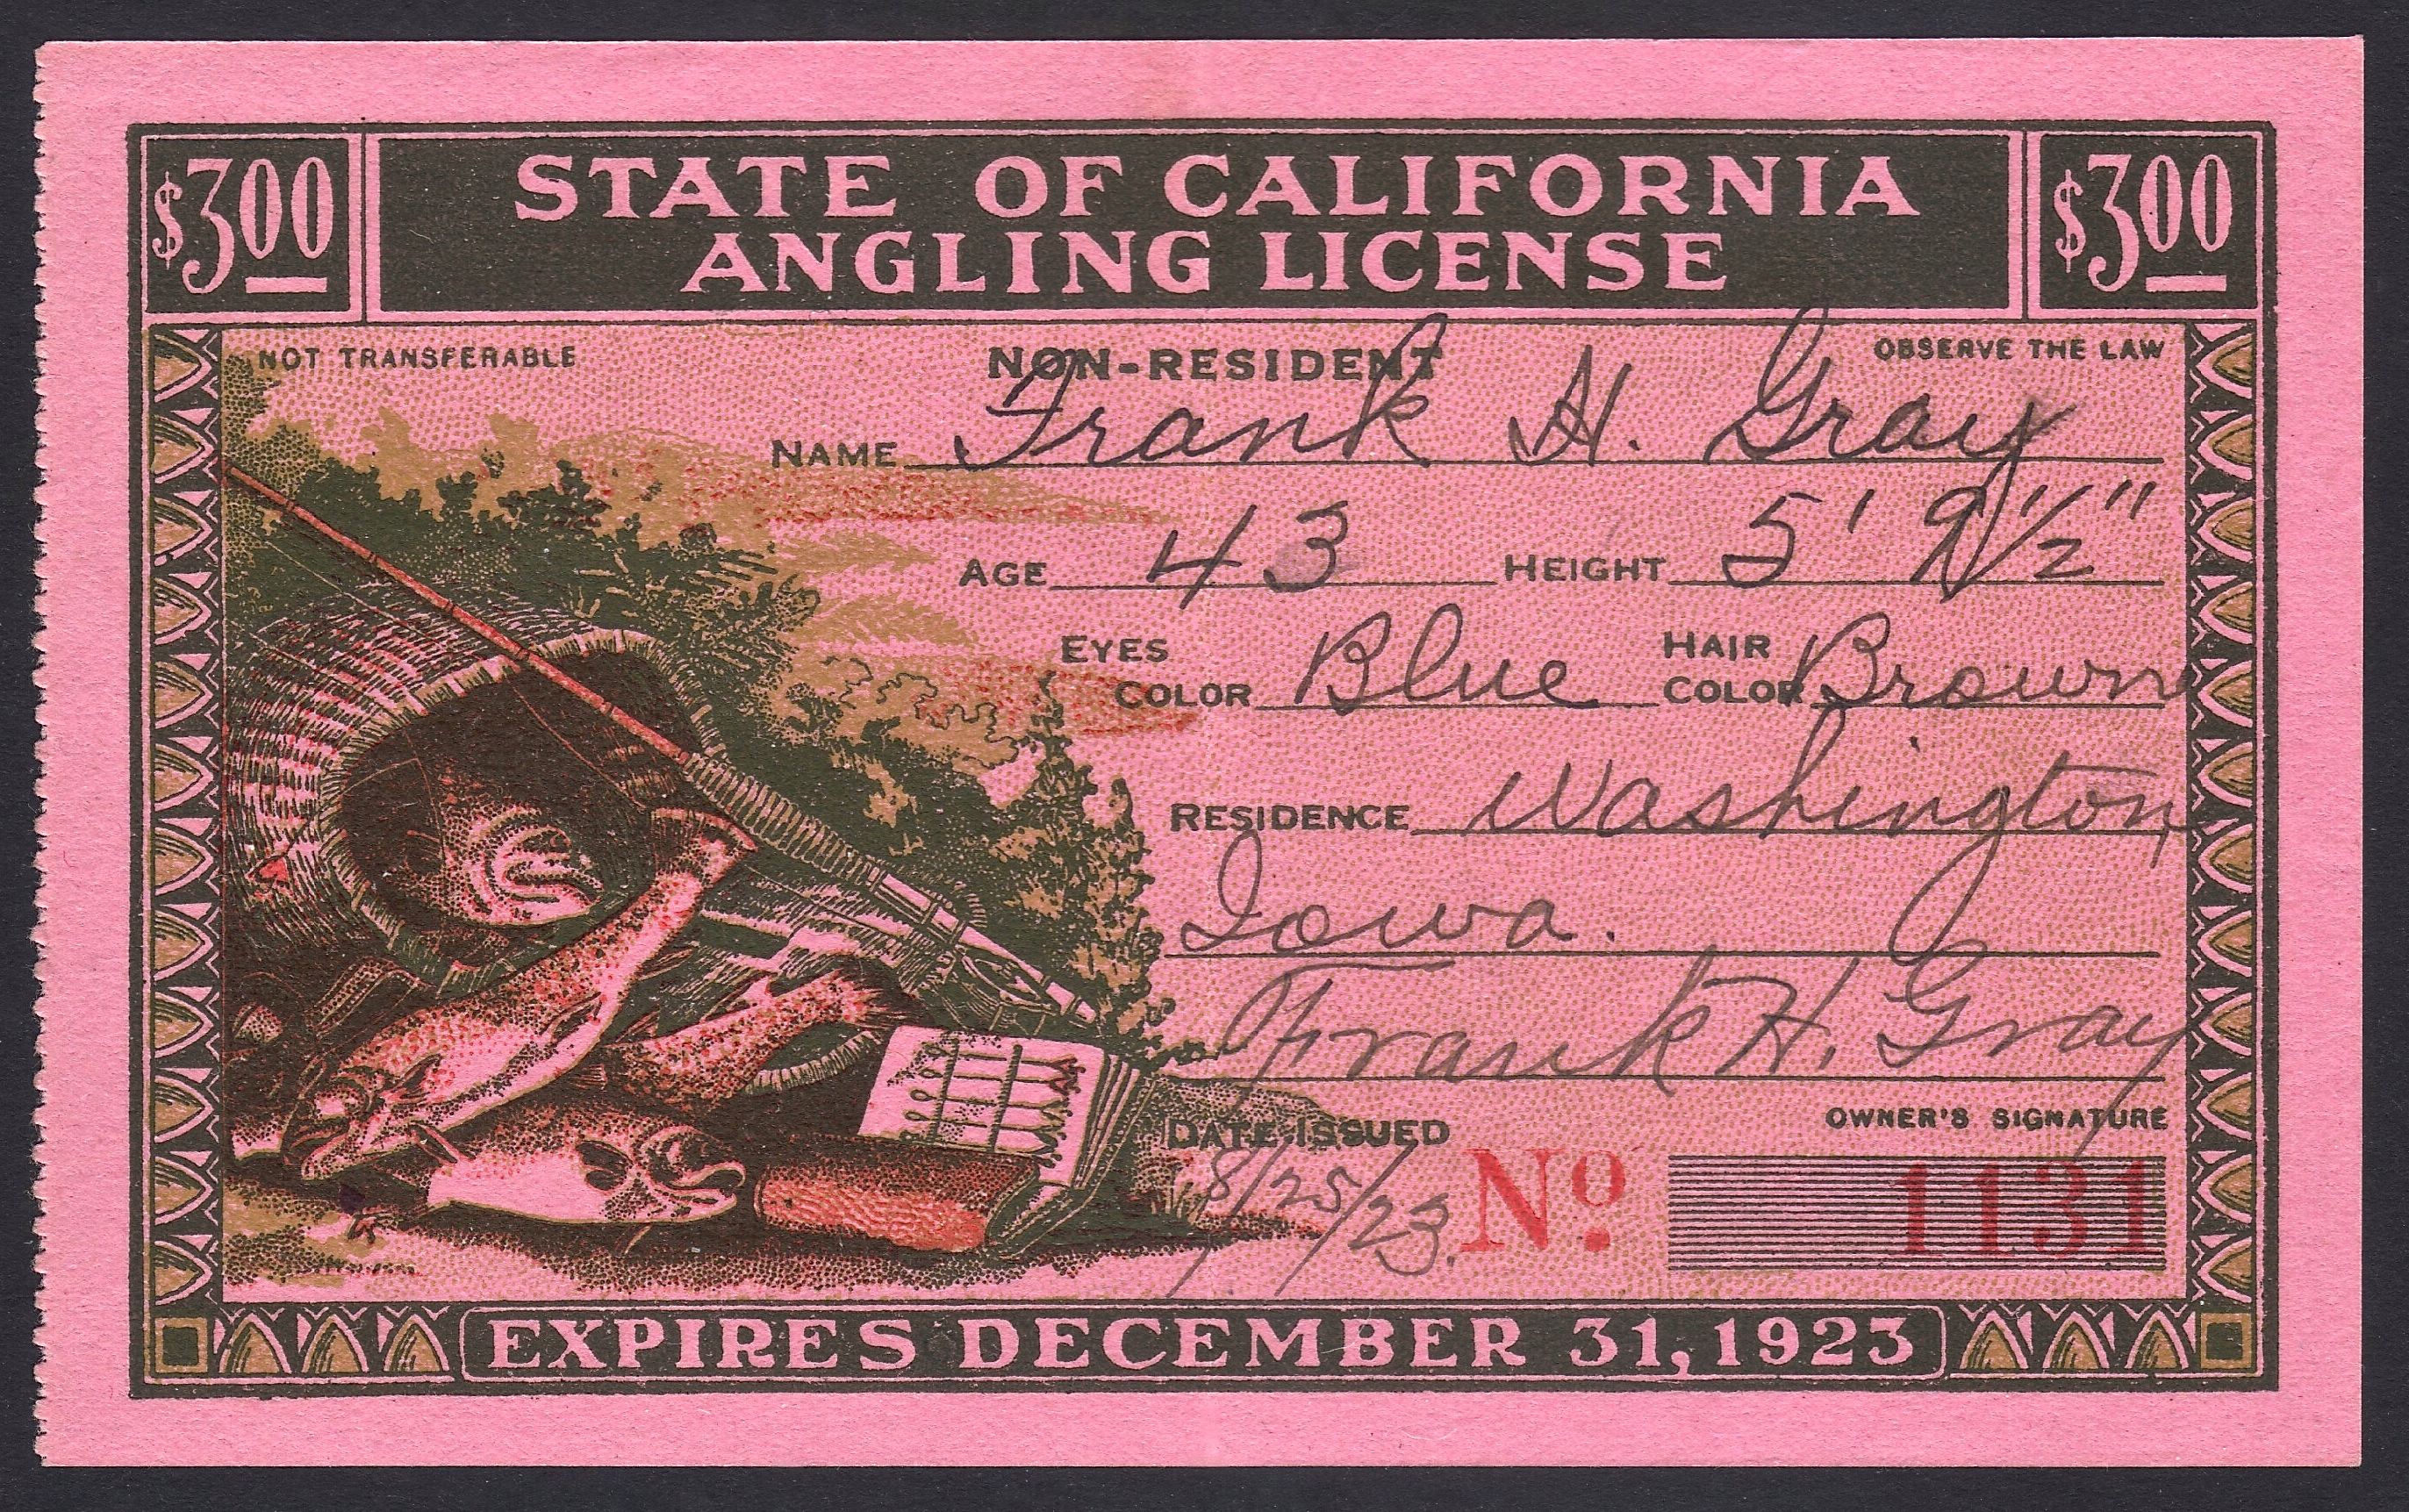 1923 California Non-Resident Angling License